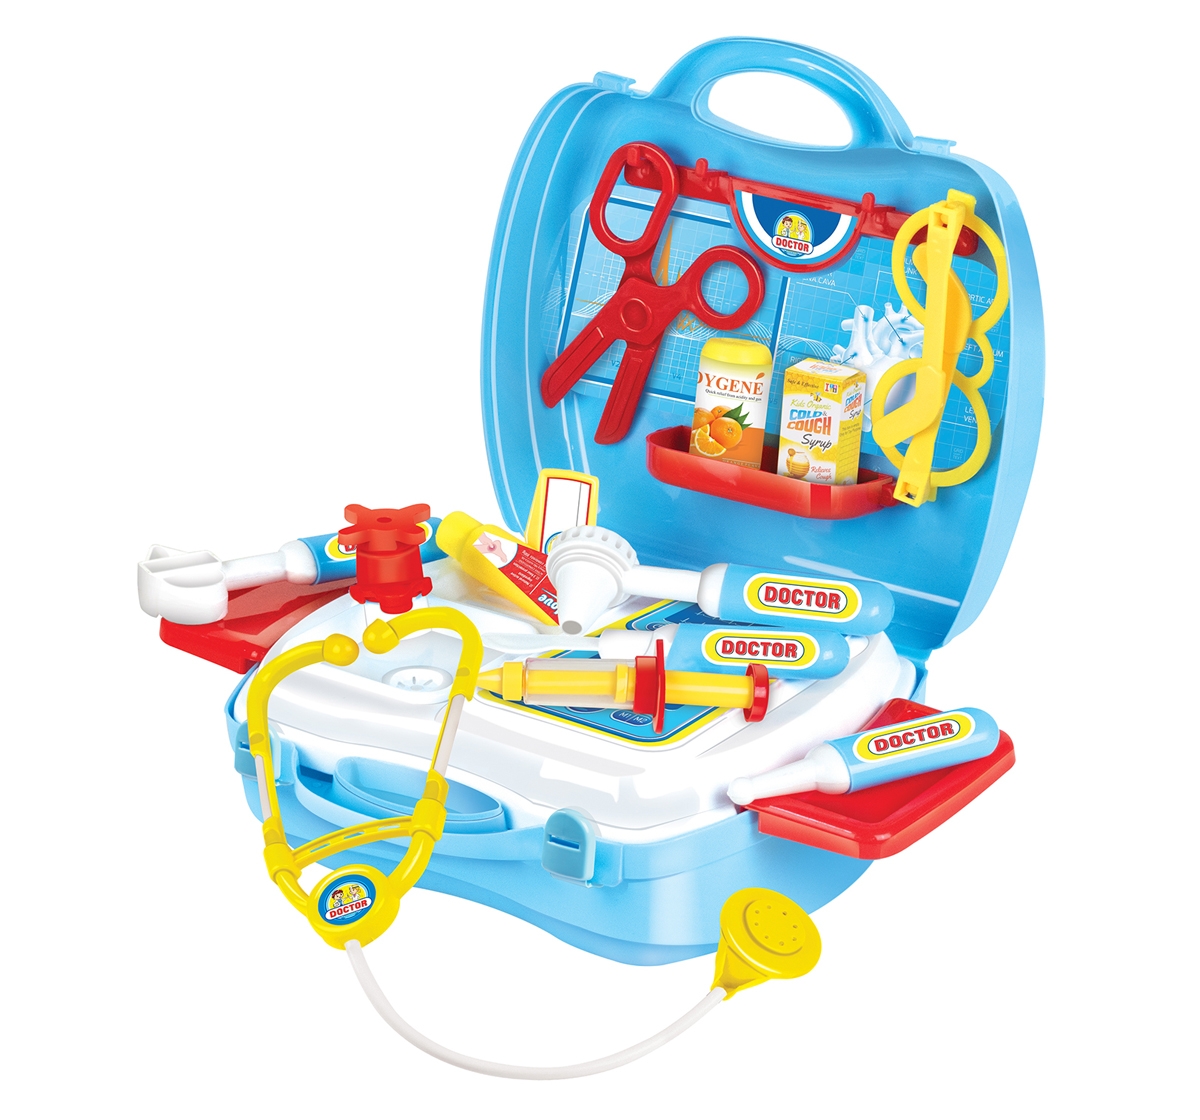 Itoys | Itoys Doctor play set with suitcase and Doctor Tools for kids Multicolor 24M+